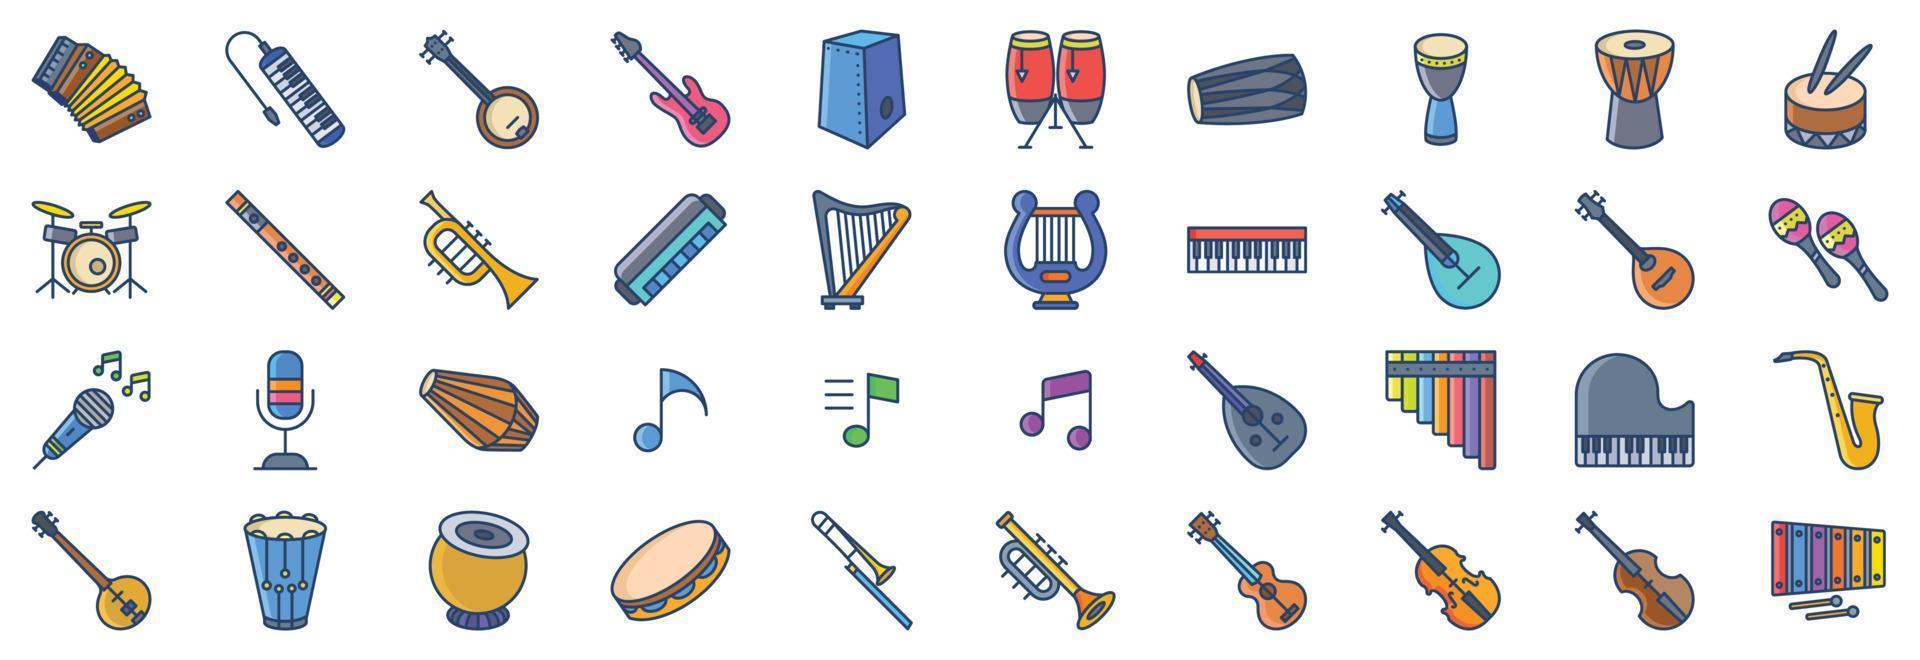 Collection of icons related to Music Instruments, including icons like Accordion, Banjo, Bass Guitar, Conga and more. vector illustrations, Pixel Perfect set